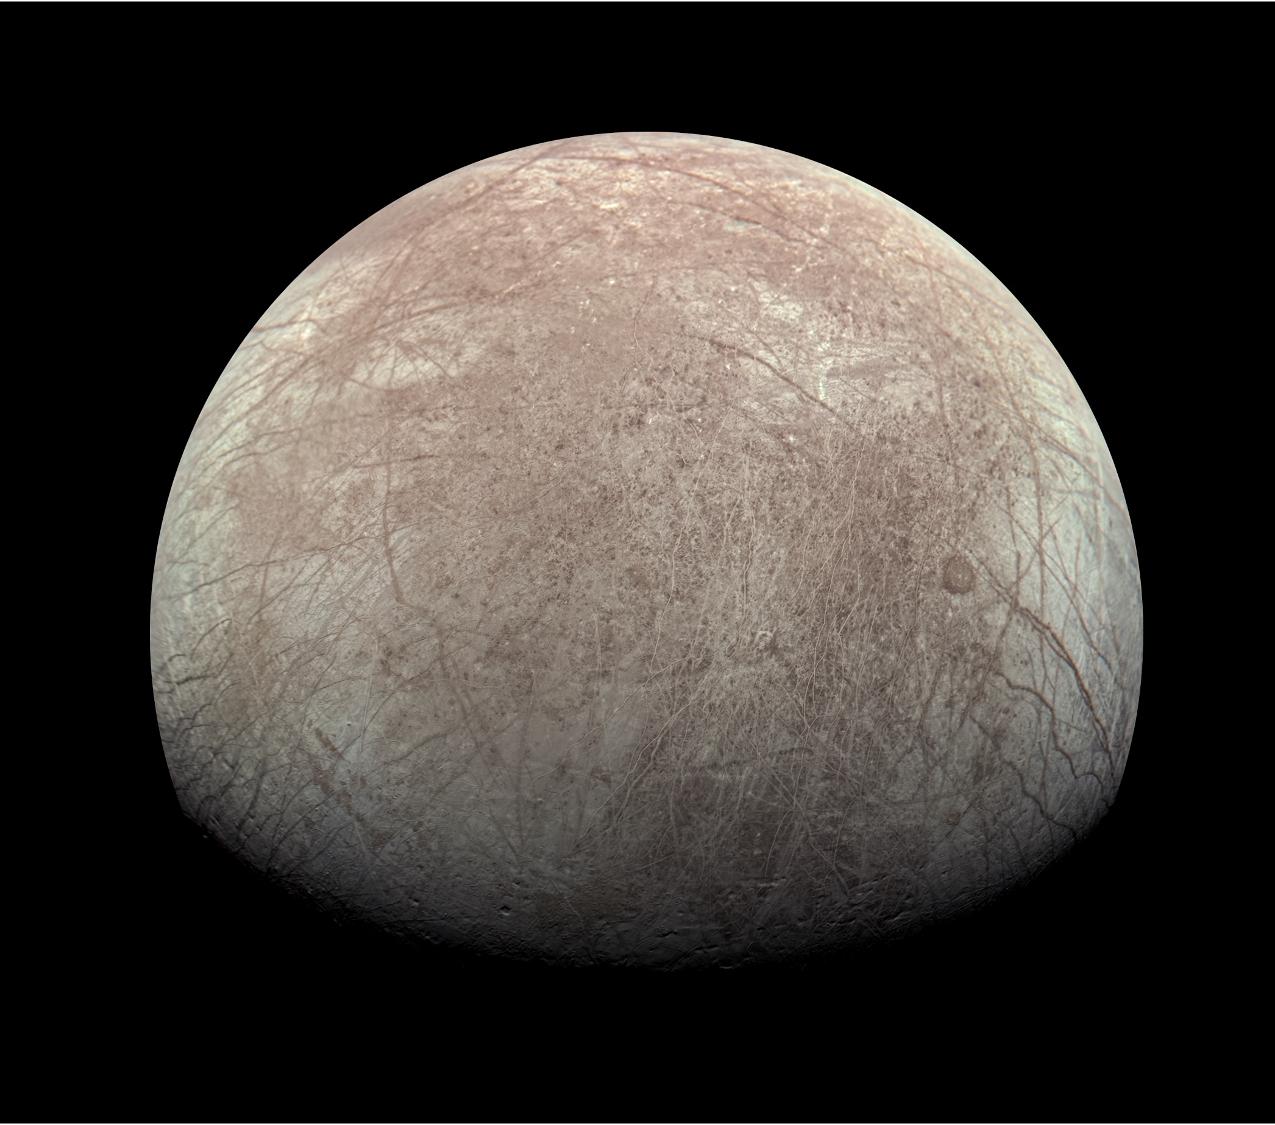 Europa seen against the blackness of space. The moons relatively smooth surface is criss-crossed with cracks and grooves. Image processed from raw JunoCam data by Kevin M. Gill